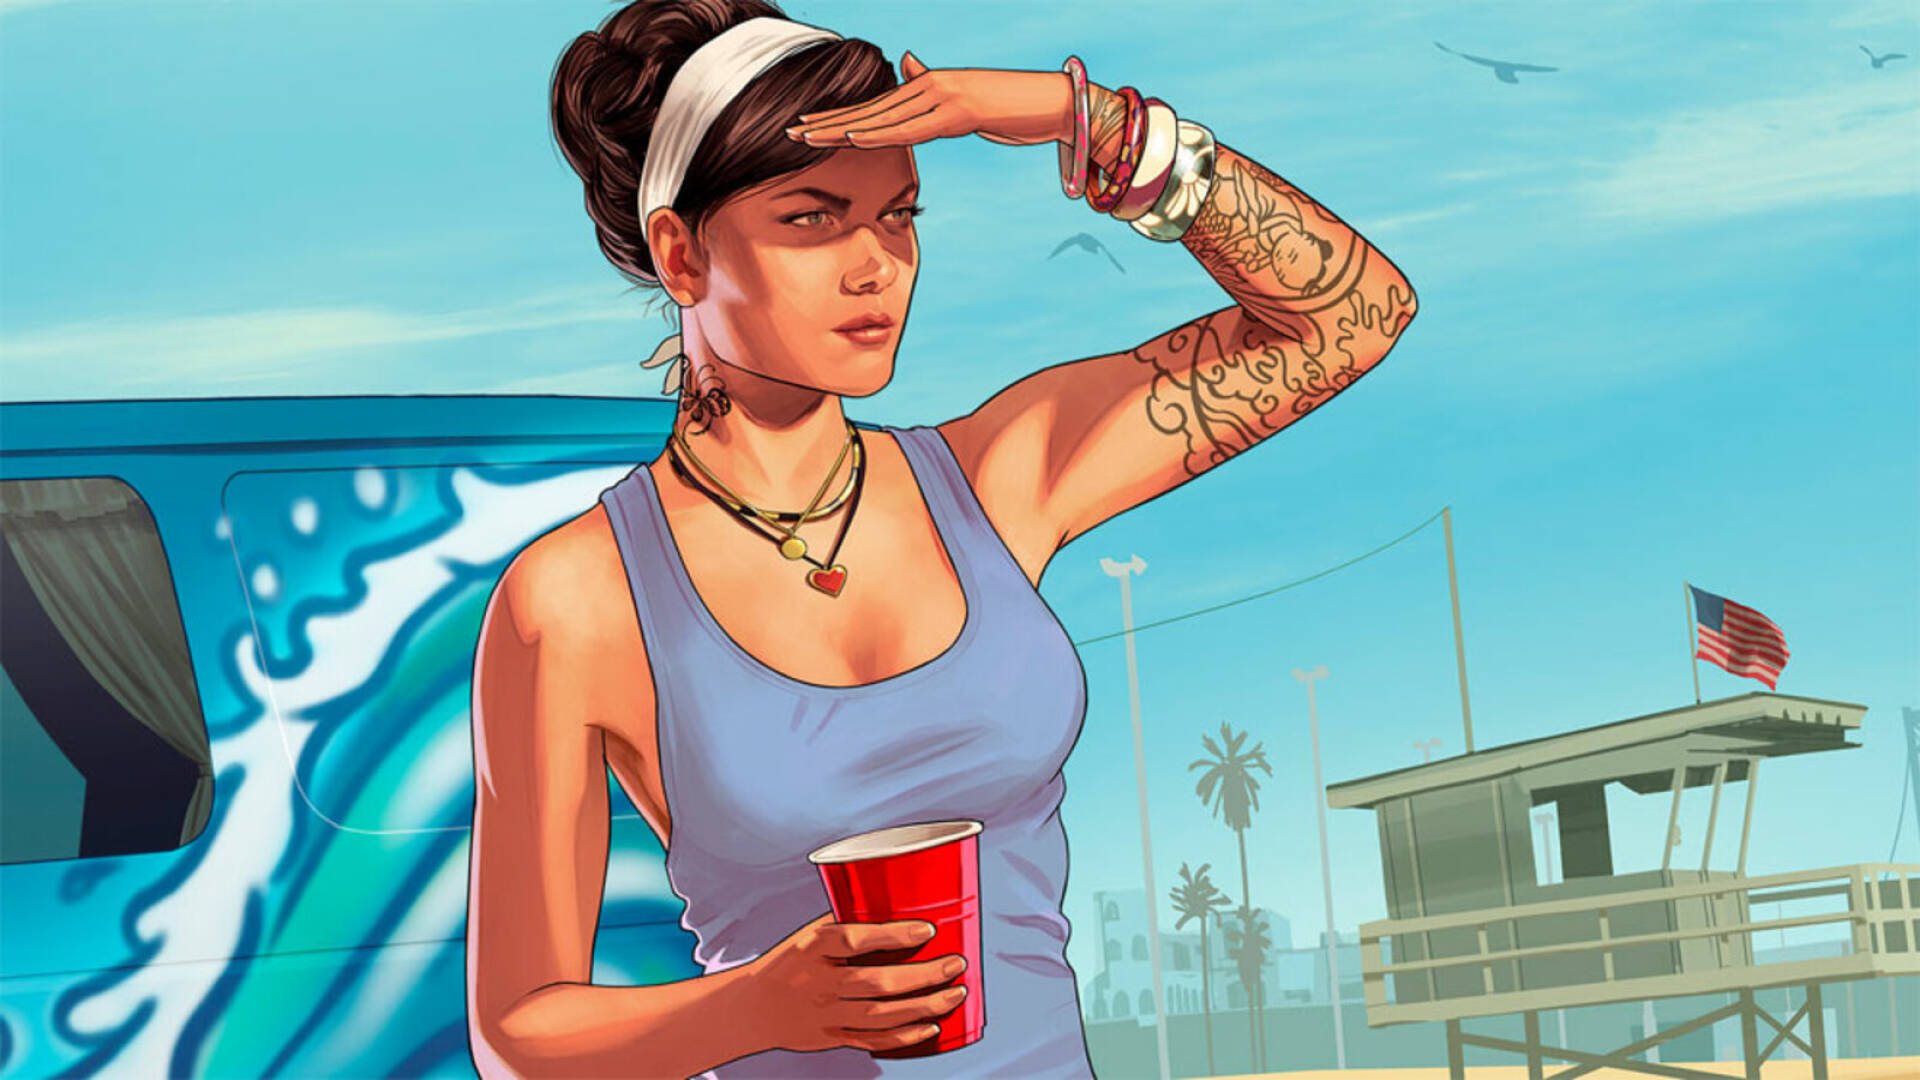 GTA 5 has seen a decline in sales: it is the first time since 2013